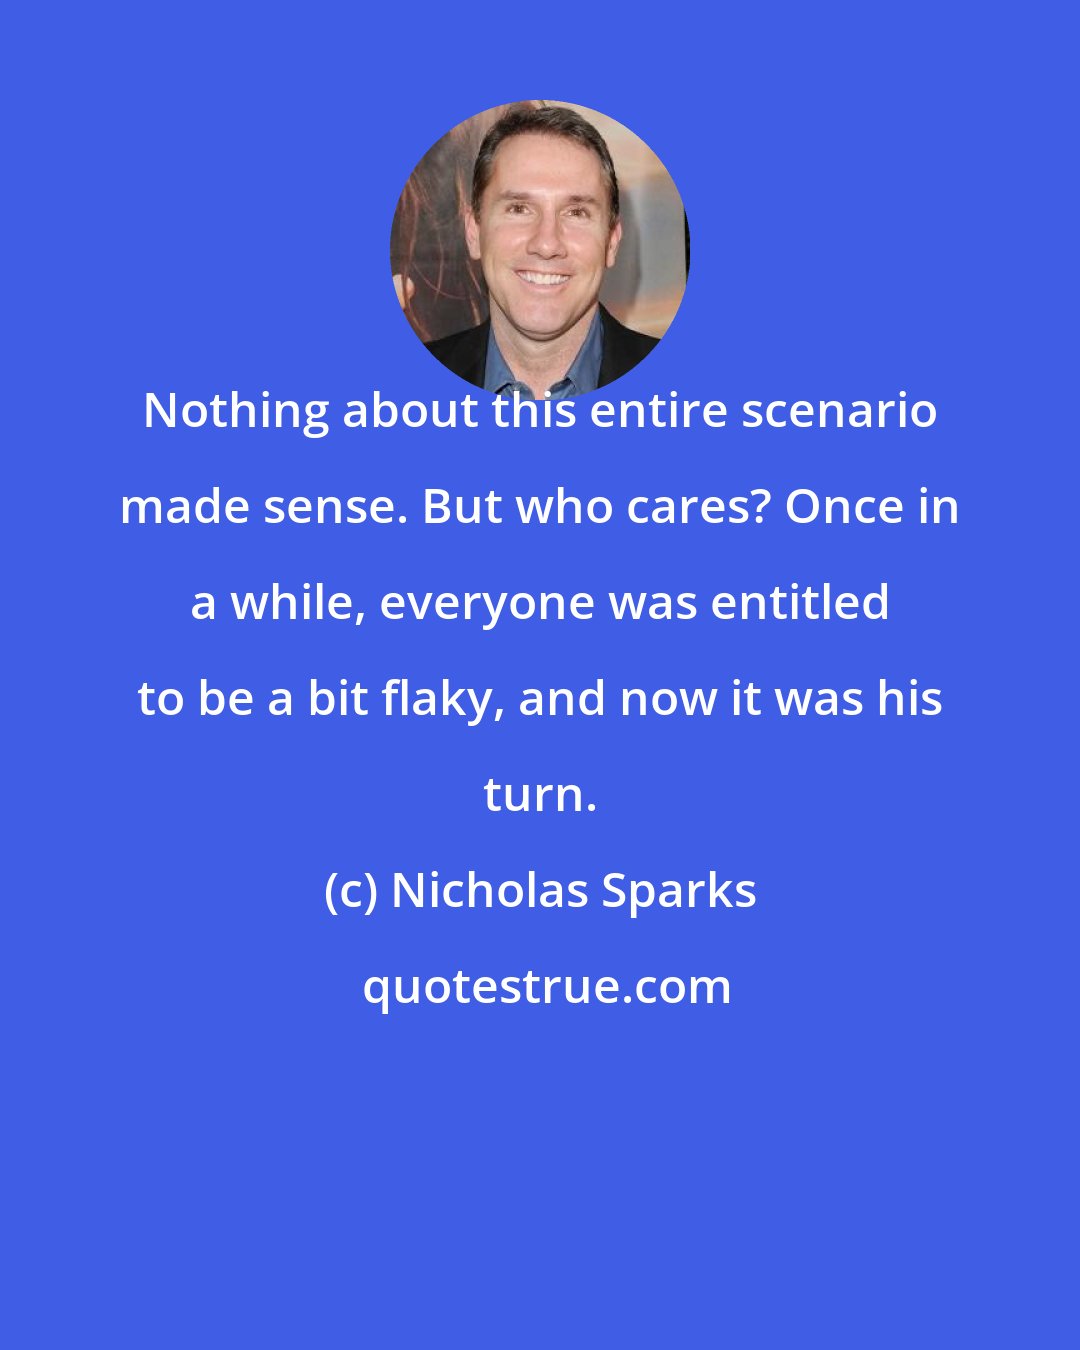 Nicholas Sparks: Nothing about this entire scenario made sense. But who cares? Once in a while, everyone was entitled to be a bit flaky, and now it was his turn.